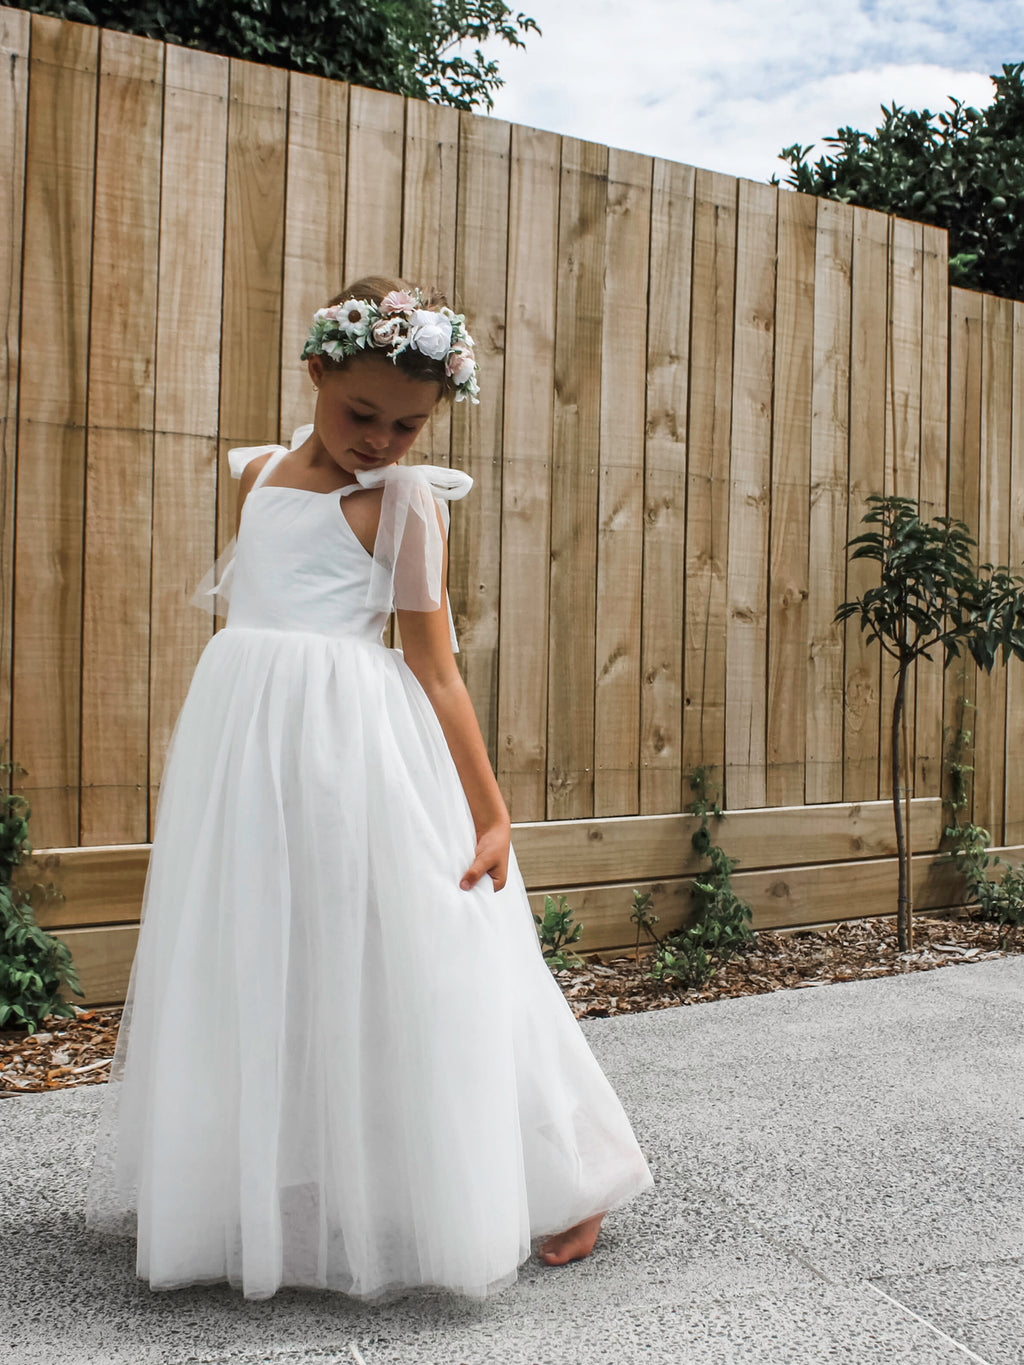 Harper flower girl dress worn by a young girl. Soft tulle skirt and straps with a shirred bodice. Worn with our Daisy flower crown.